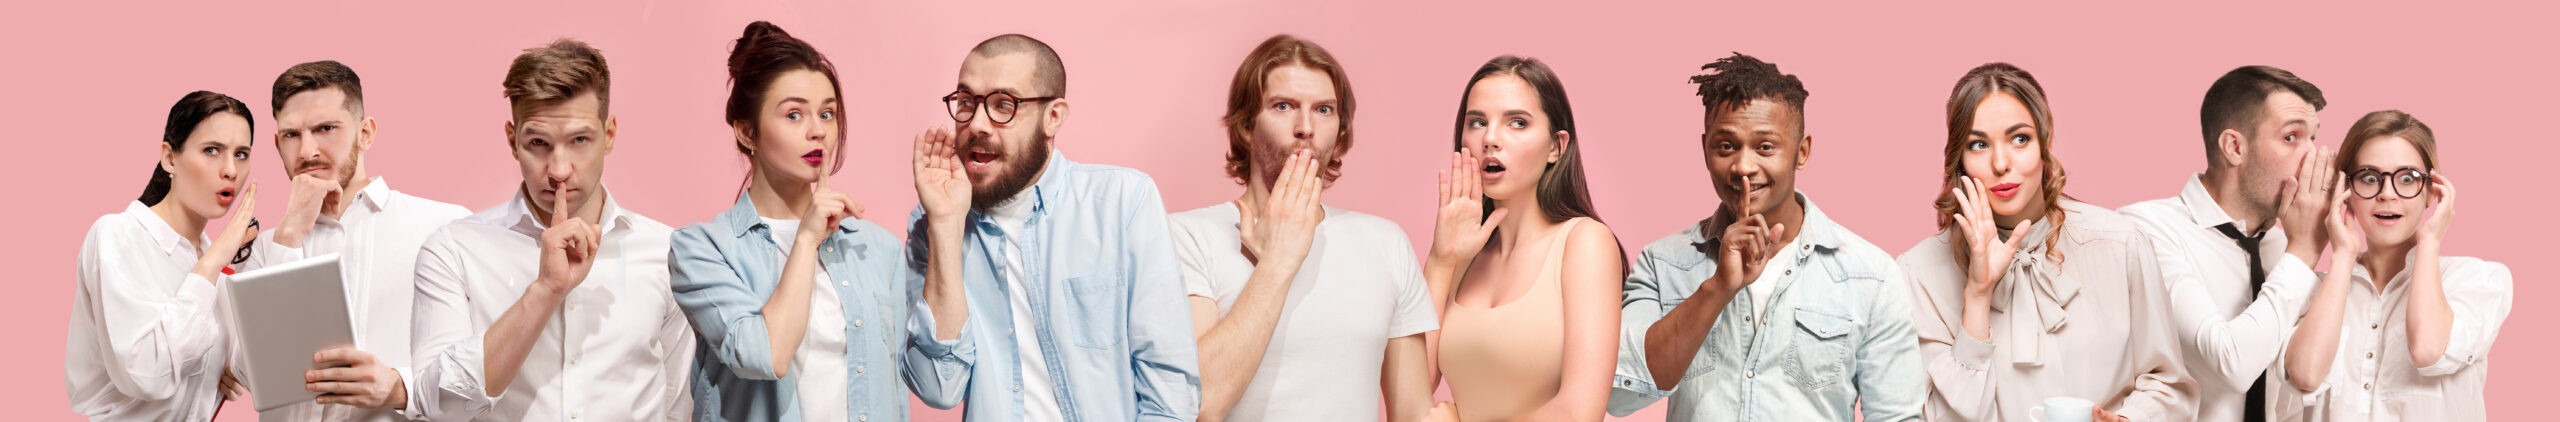 Young men and women whispering a secret on pink background